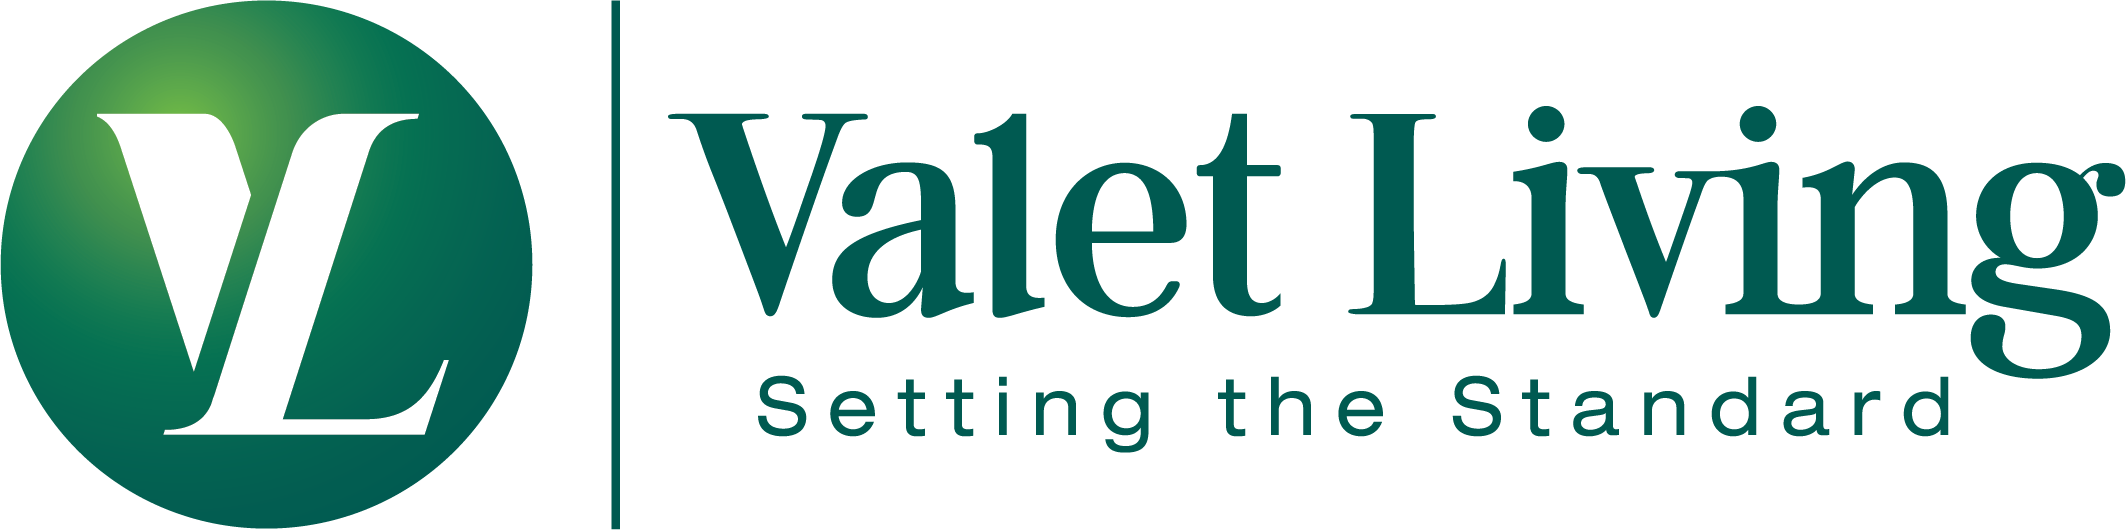 Valet Living Acquire